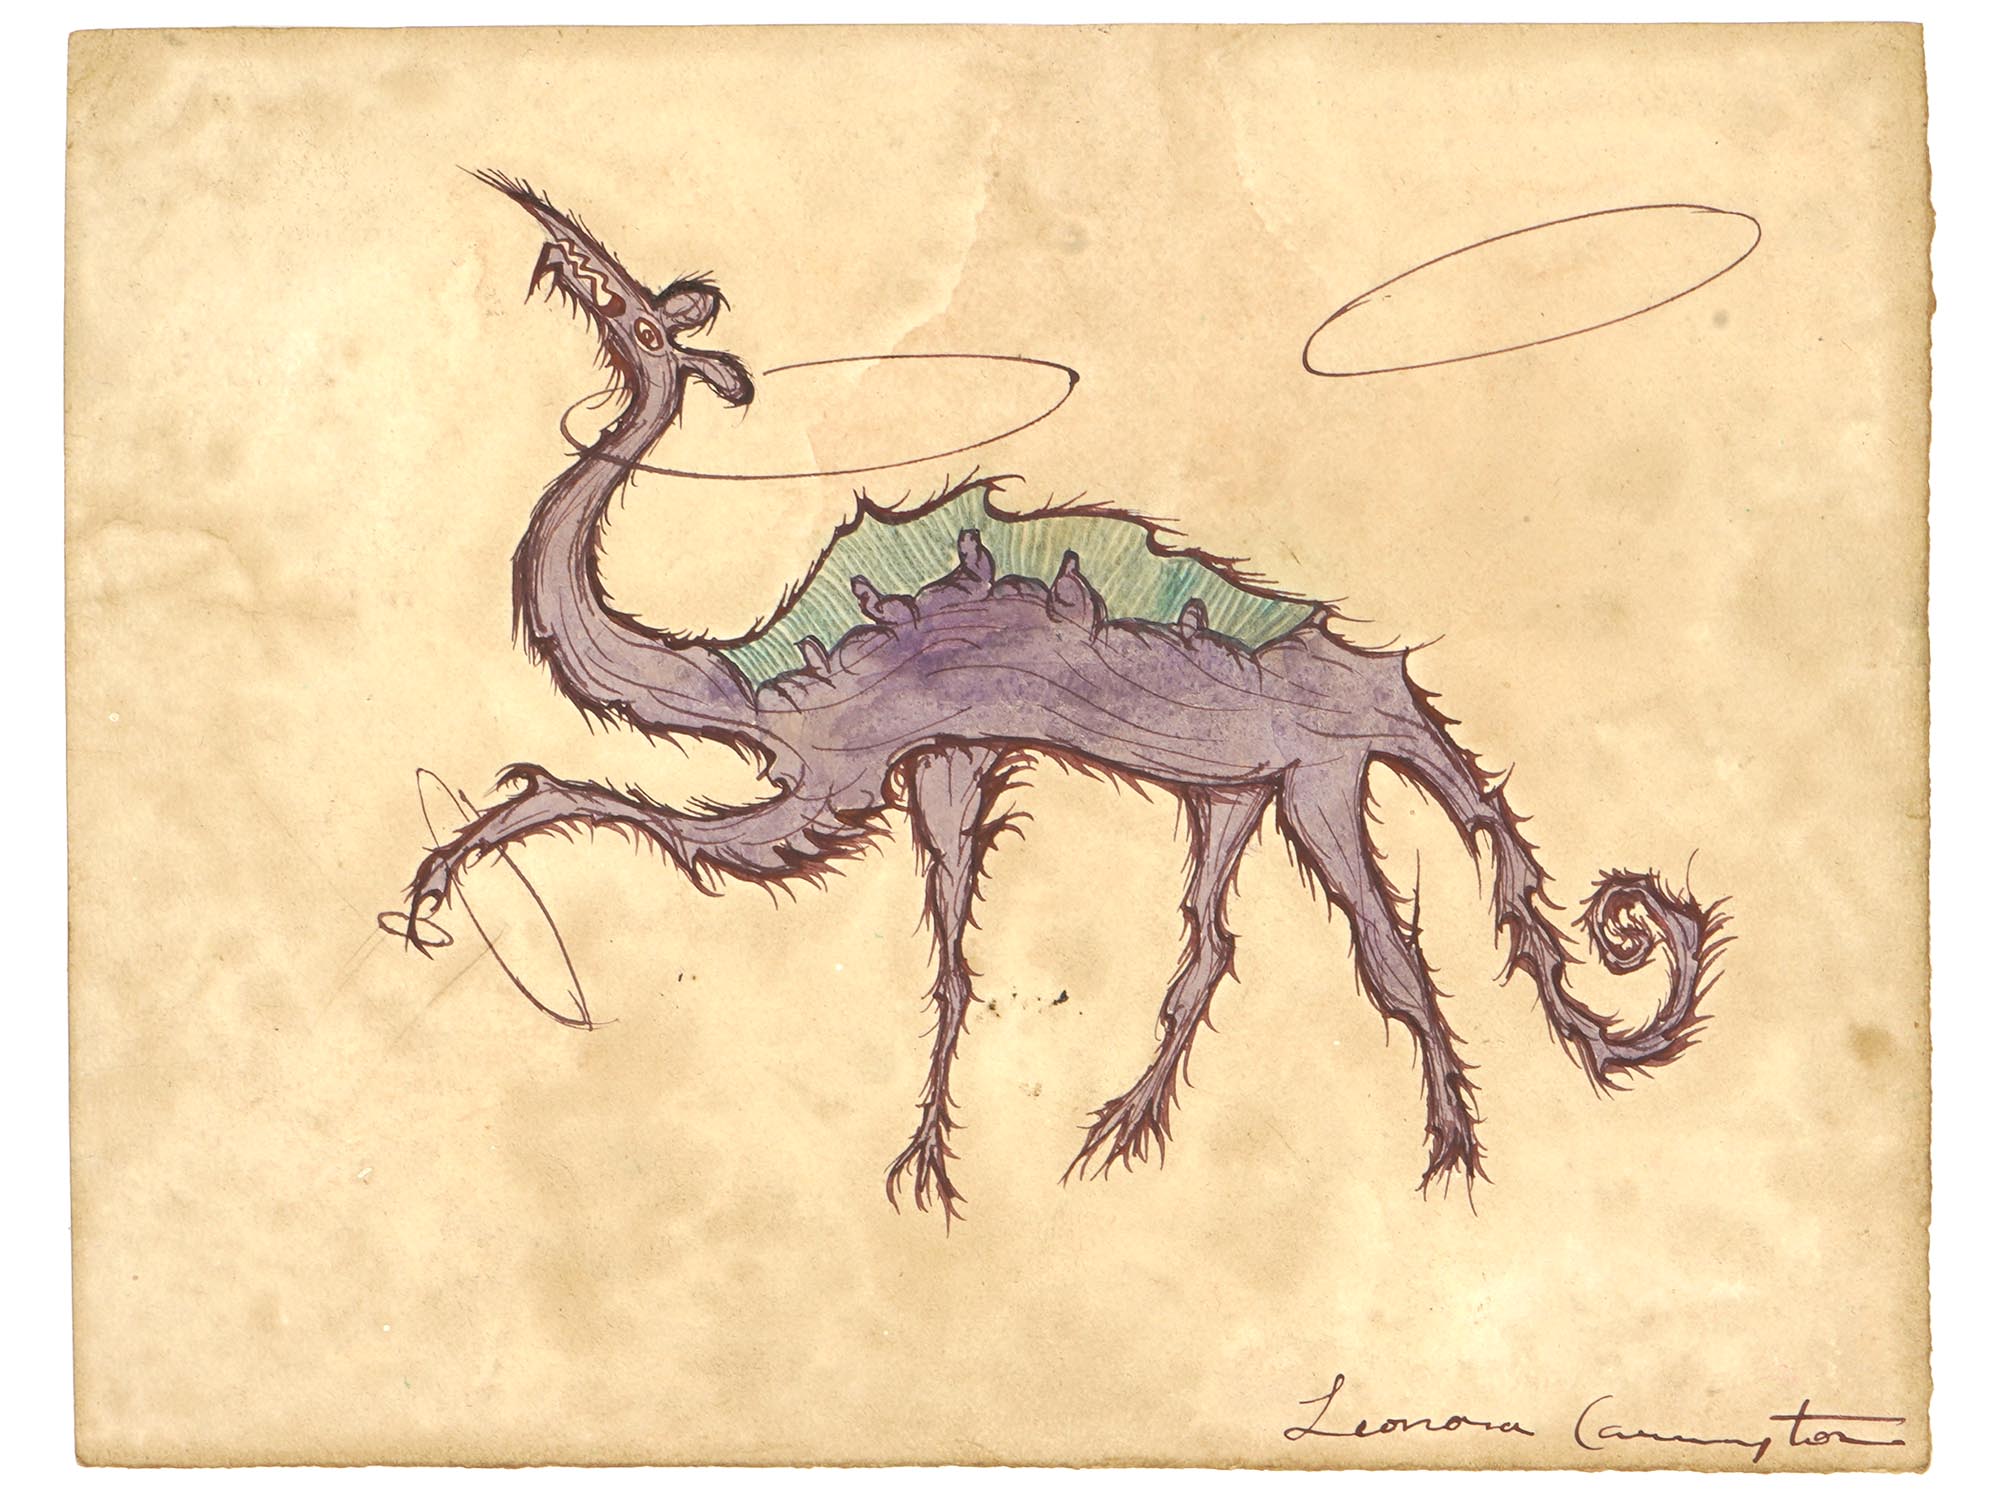 URREAL BRITISH INK PAINTING BY LEONORA CARRINGTON PIC-0